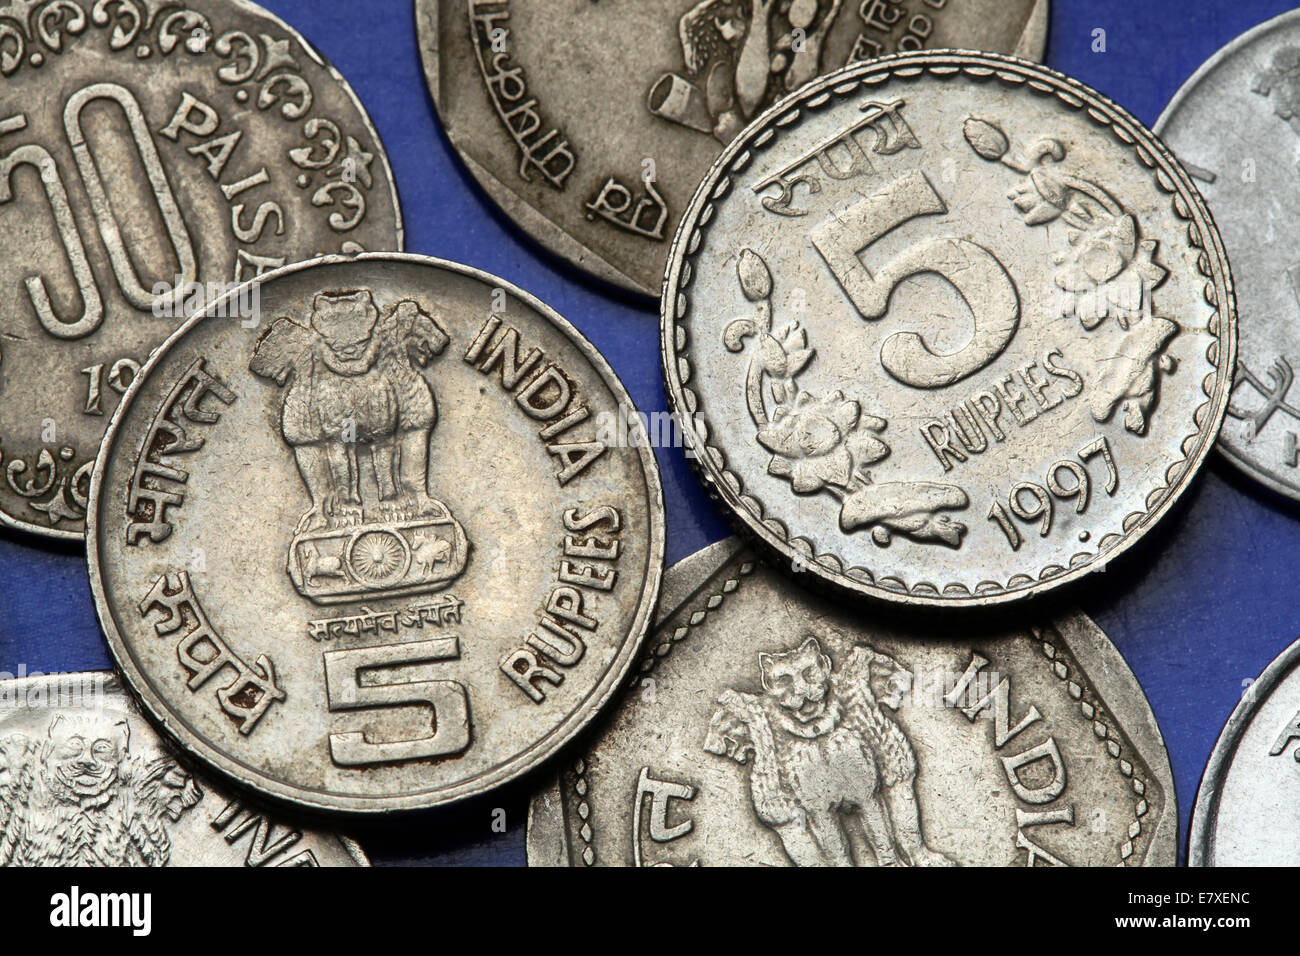 Coins of India. The Sarnath Lion Capital of Ashoka served as the state emblem of India depicted in the Indian five rupees coin. Stock Photo